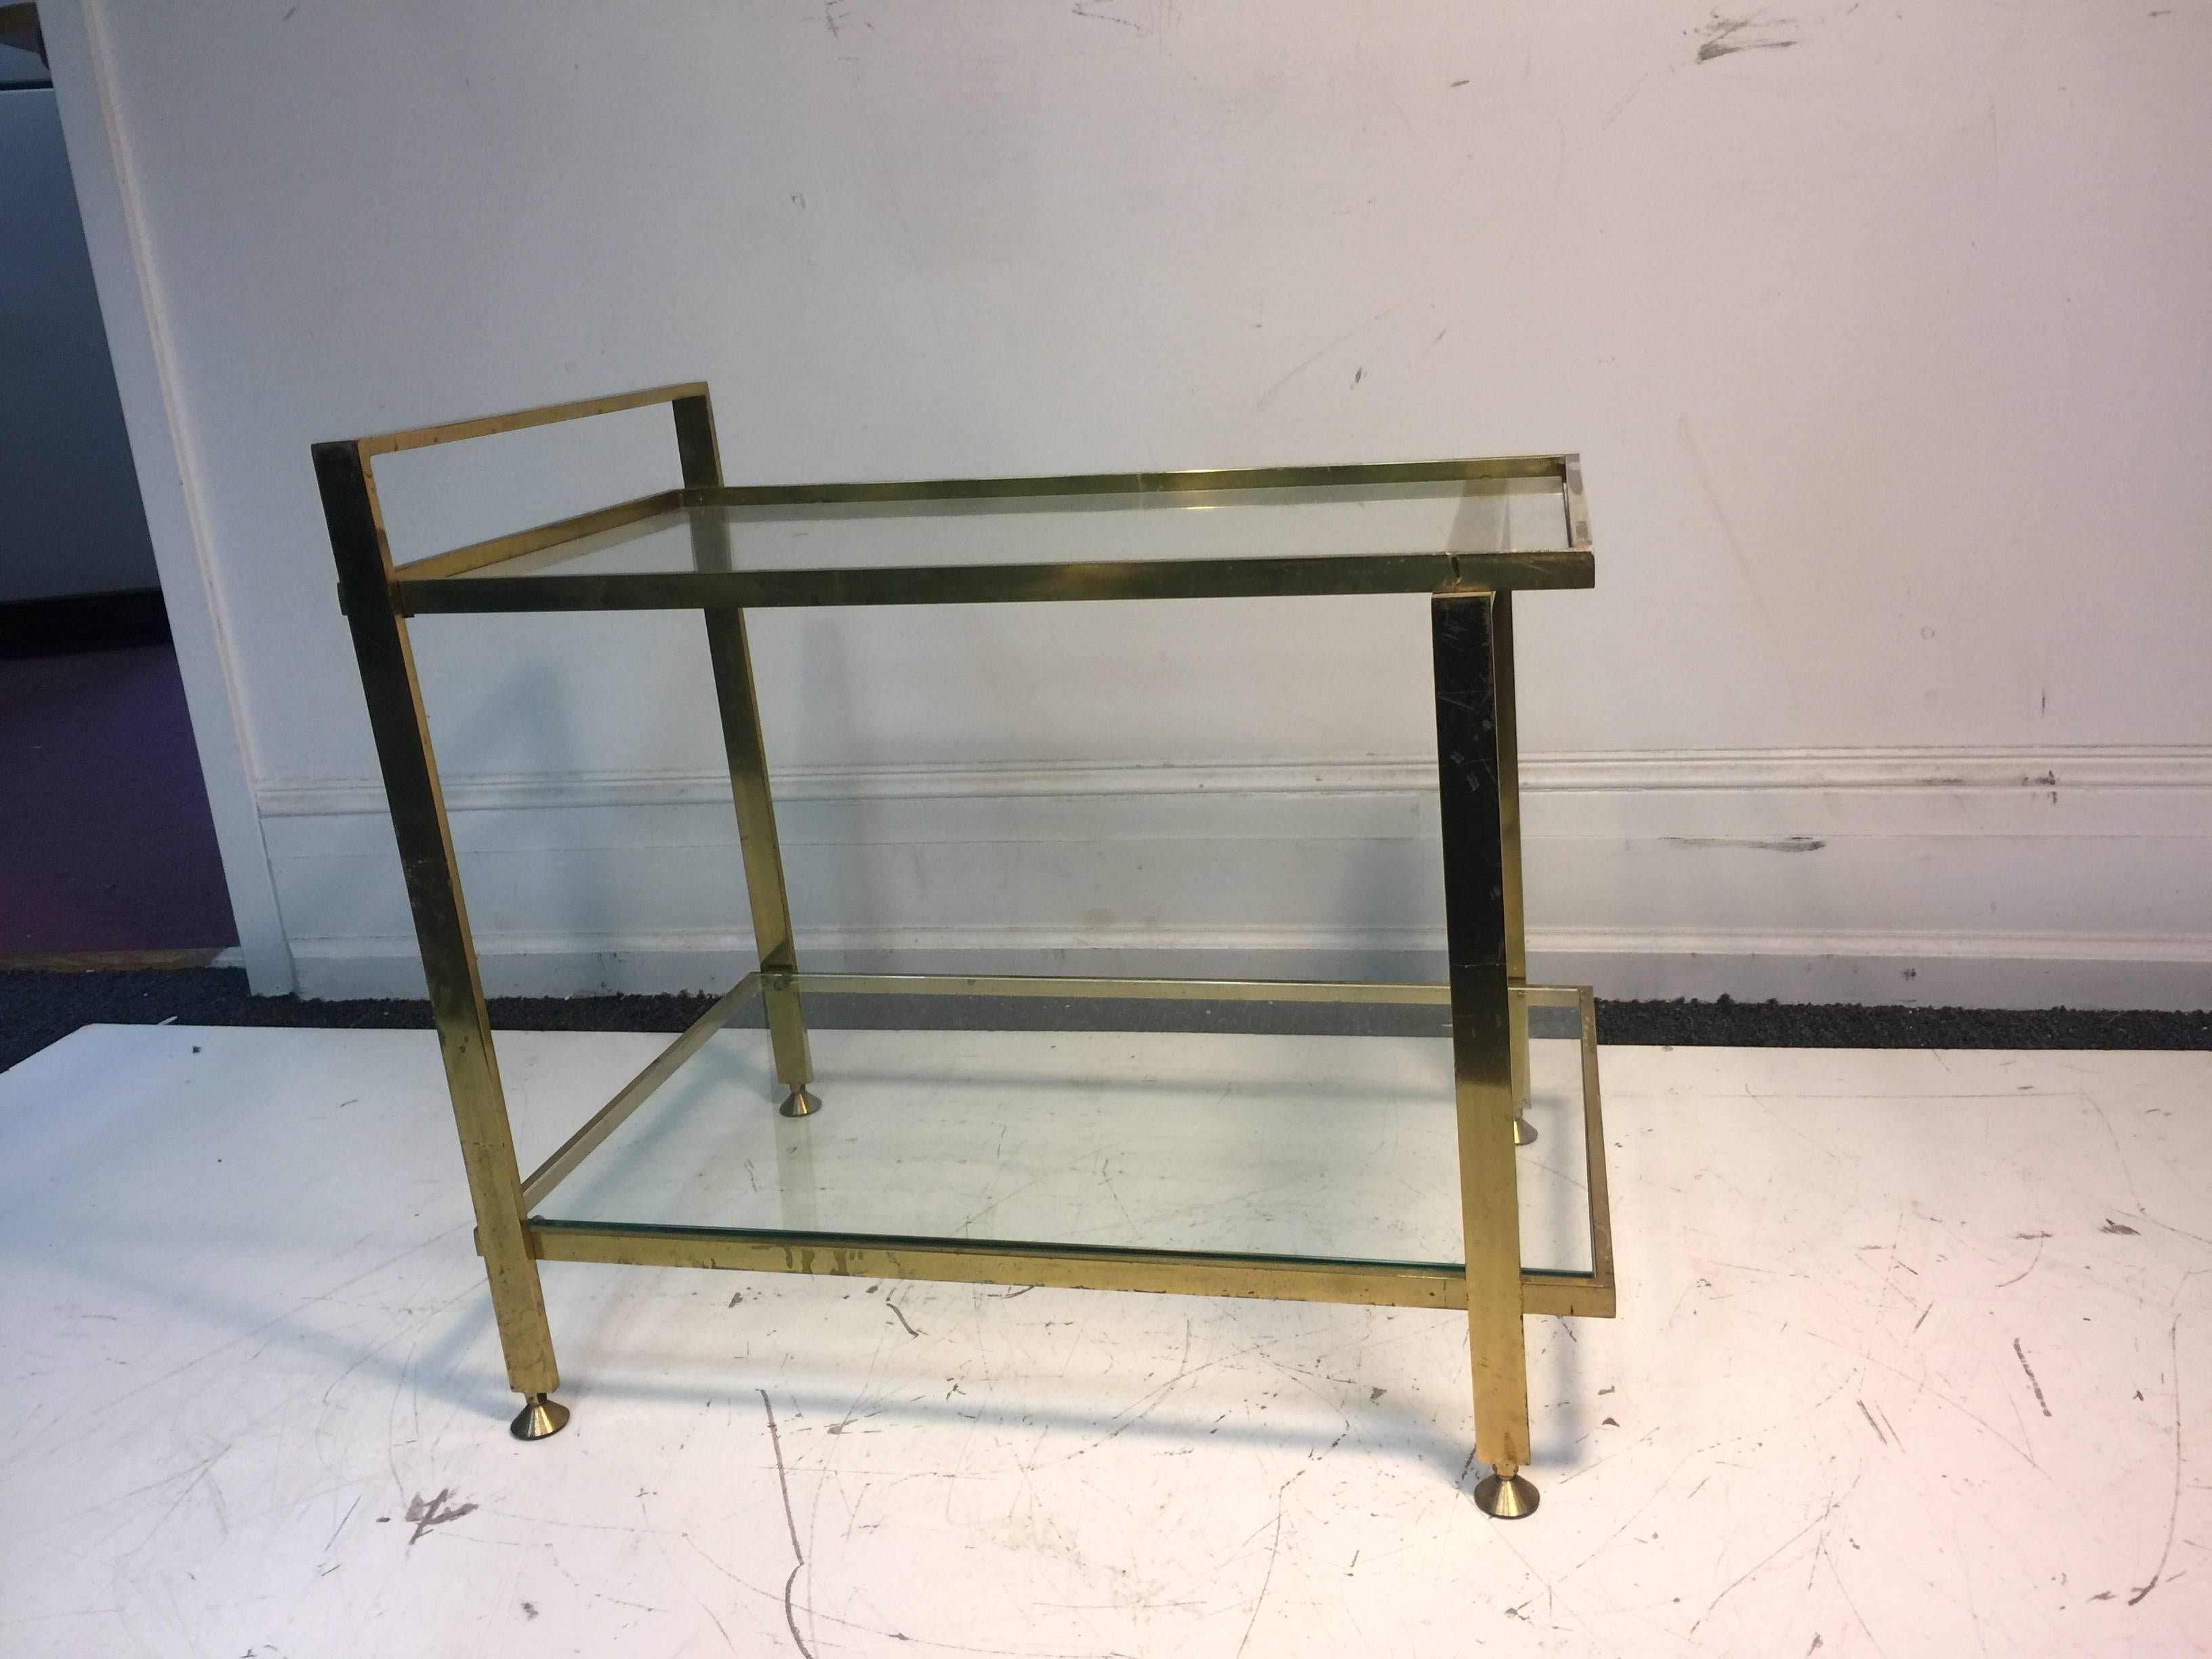 An elegant, two-tier, Italian brass bar cart, circa 1970. Good vintage condition with some wear to the brass.